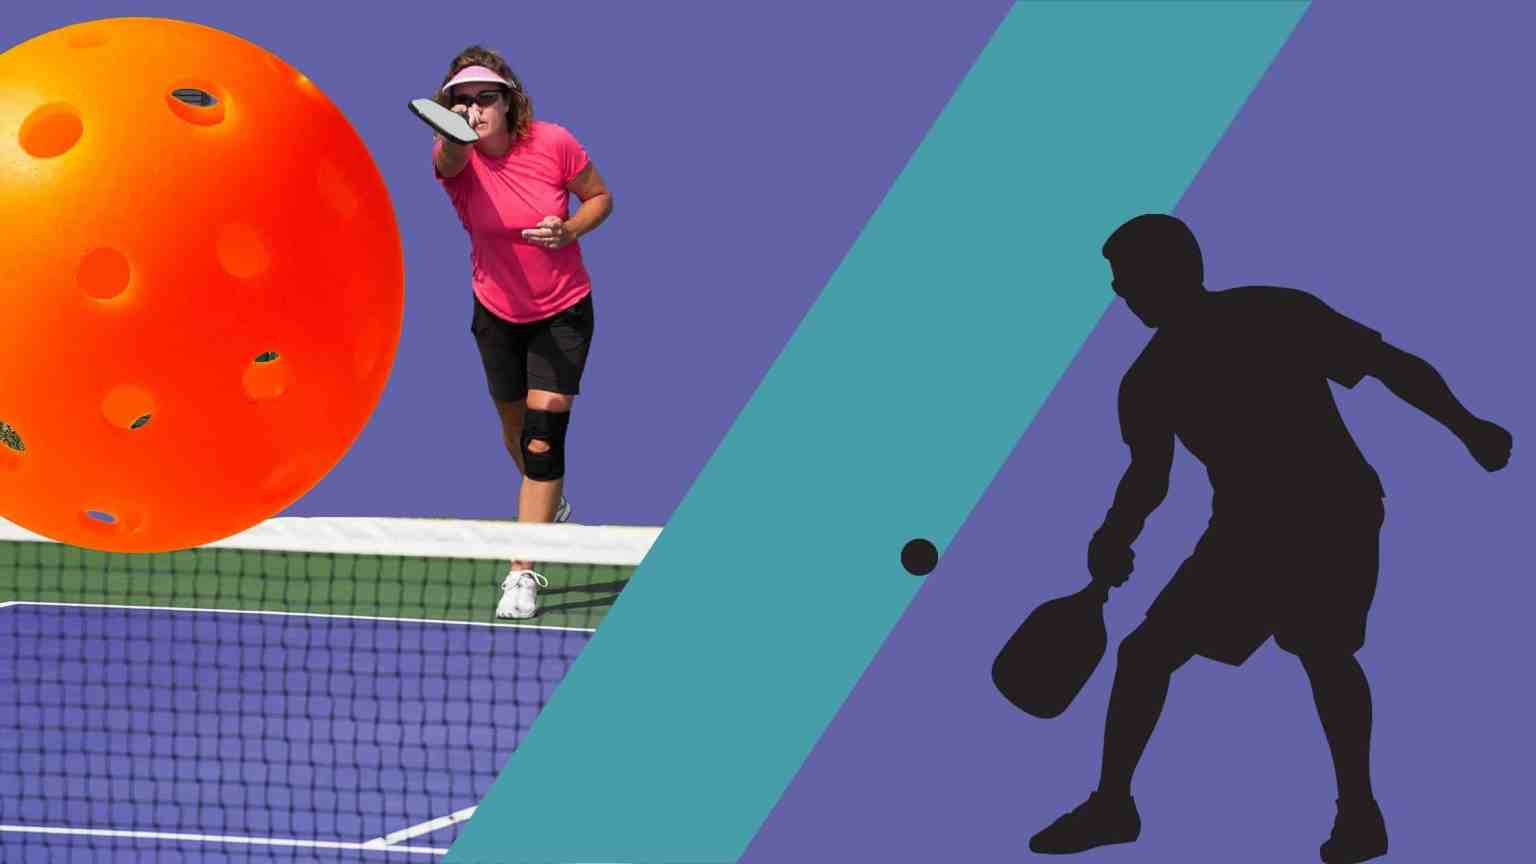 Top Illegal Pickleball Serves You Must Avoid to Play Fair